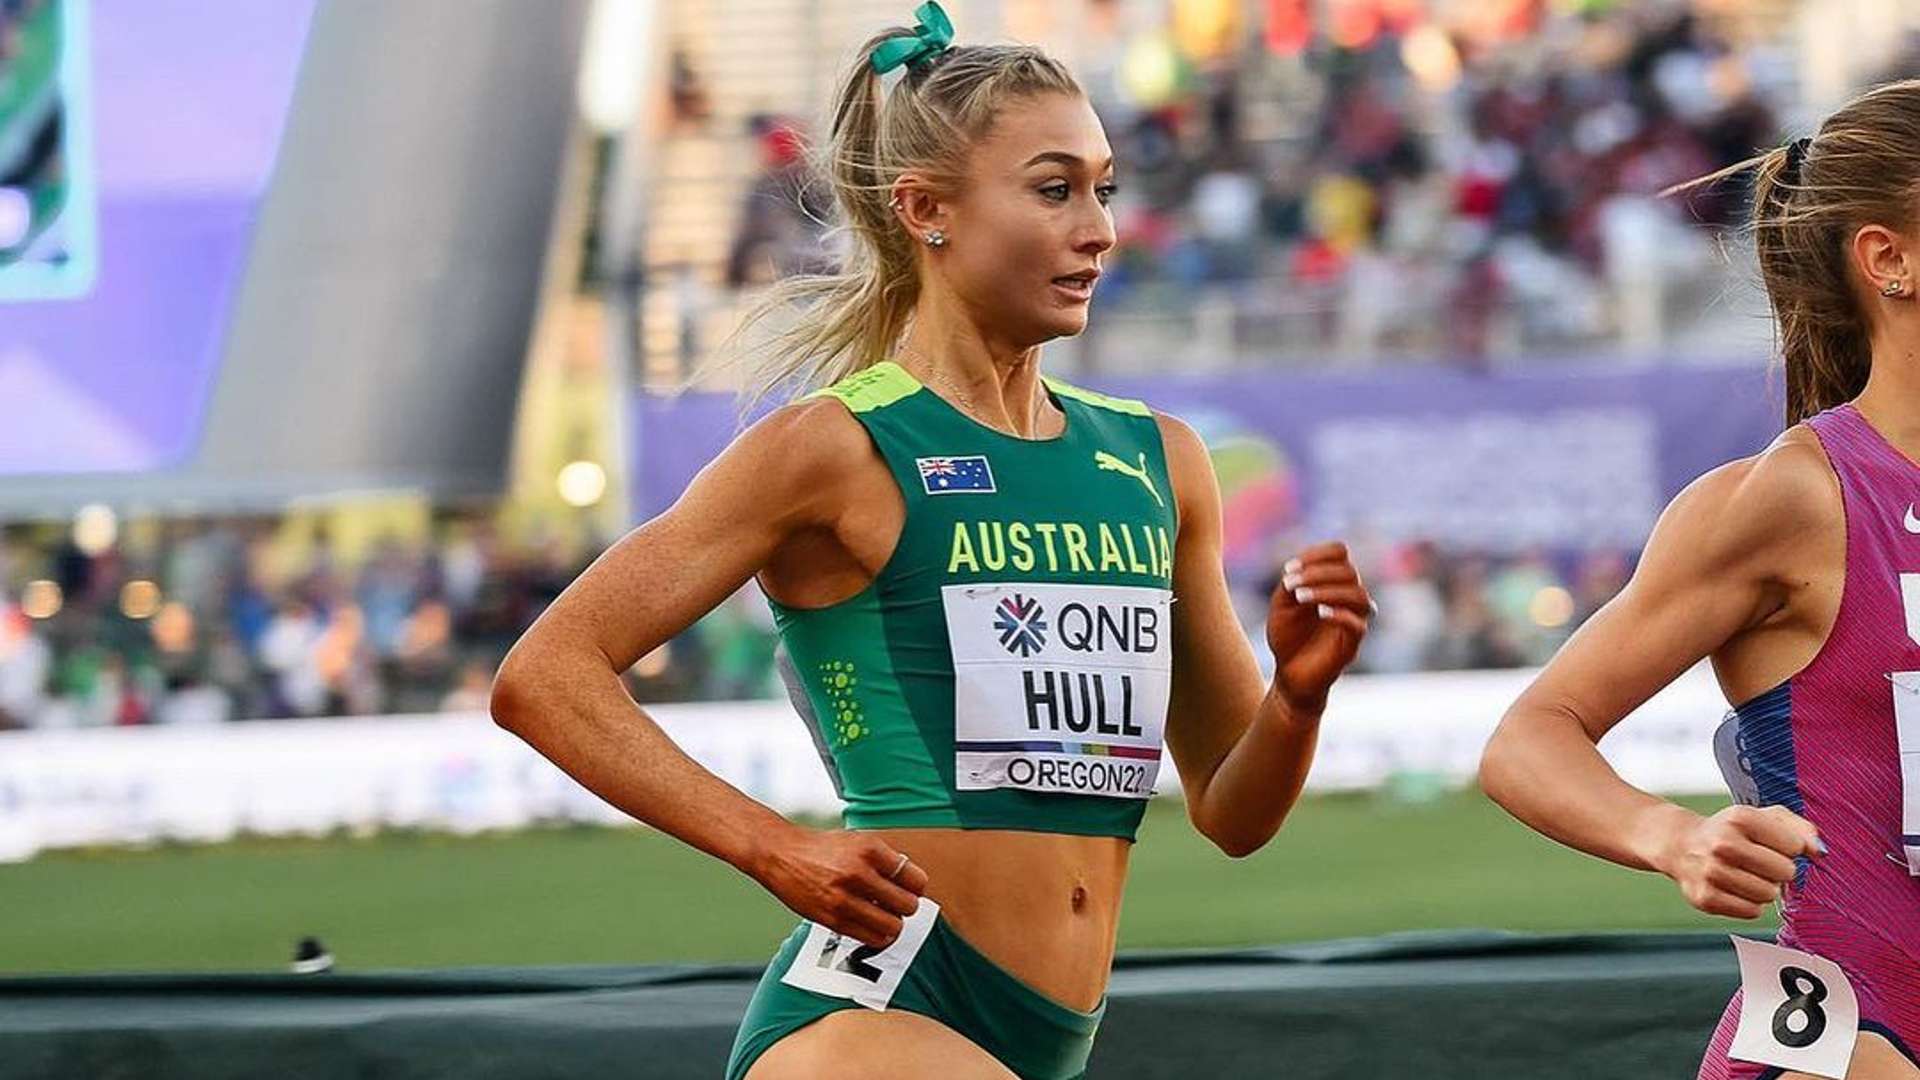 Jessica Hull in action during World Championships 2022 (Image Credits - Instagram/ @jessicaahull)